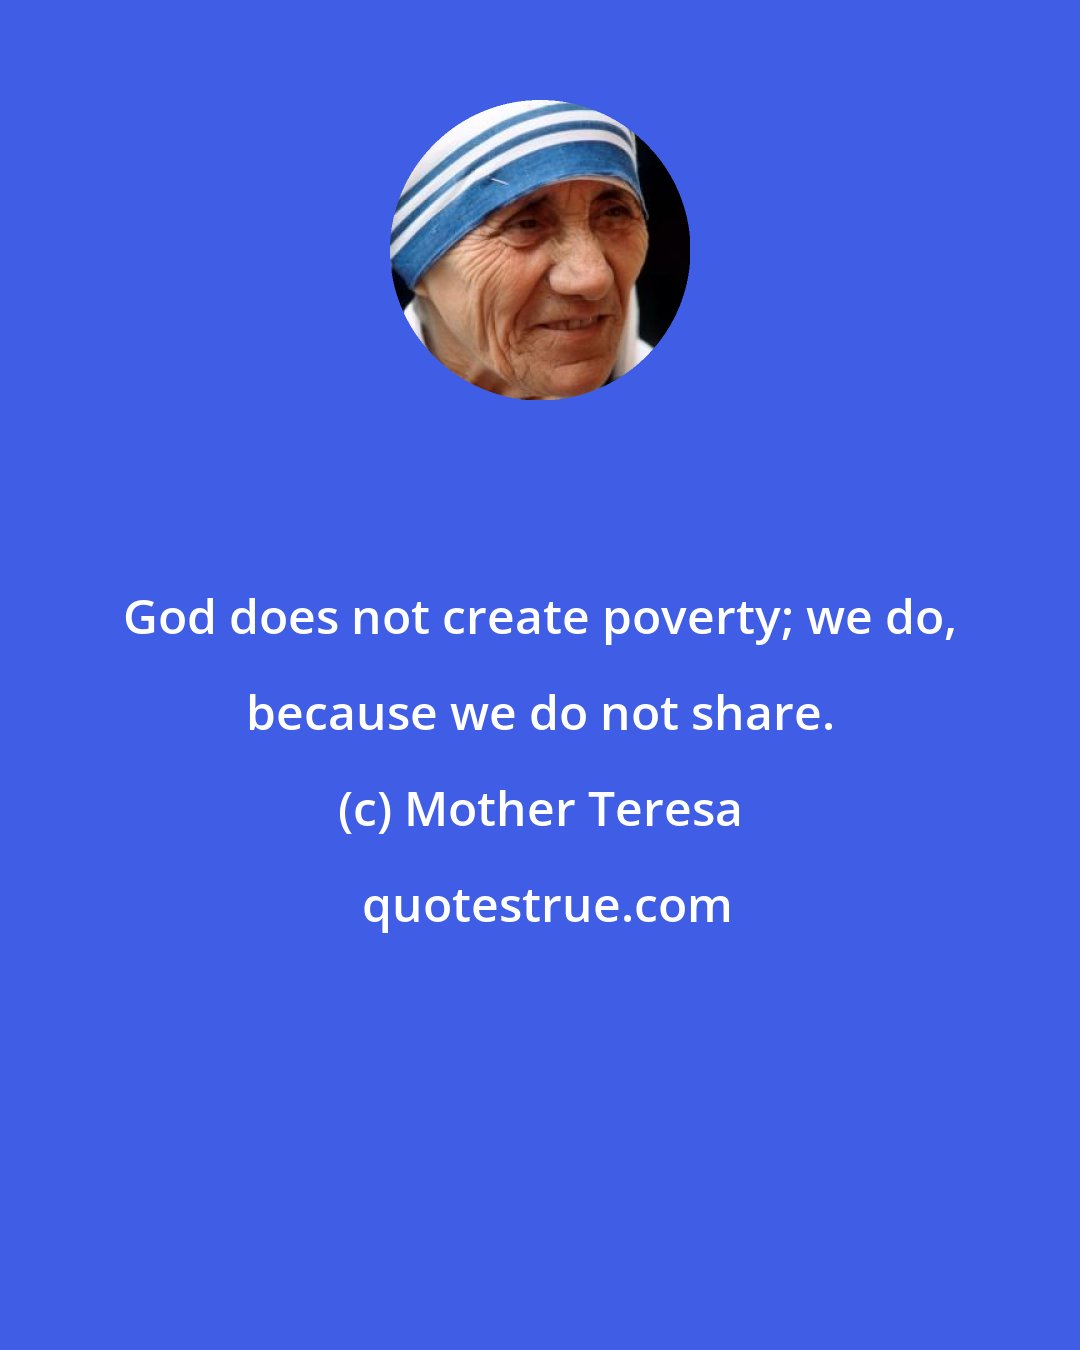 Mother Teresa: God does not create poverty; we do, because we do not share.